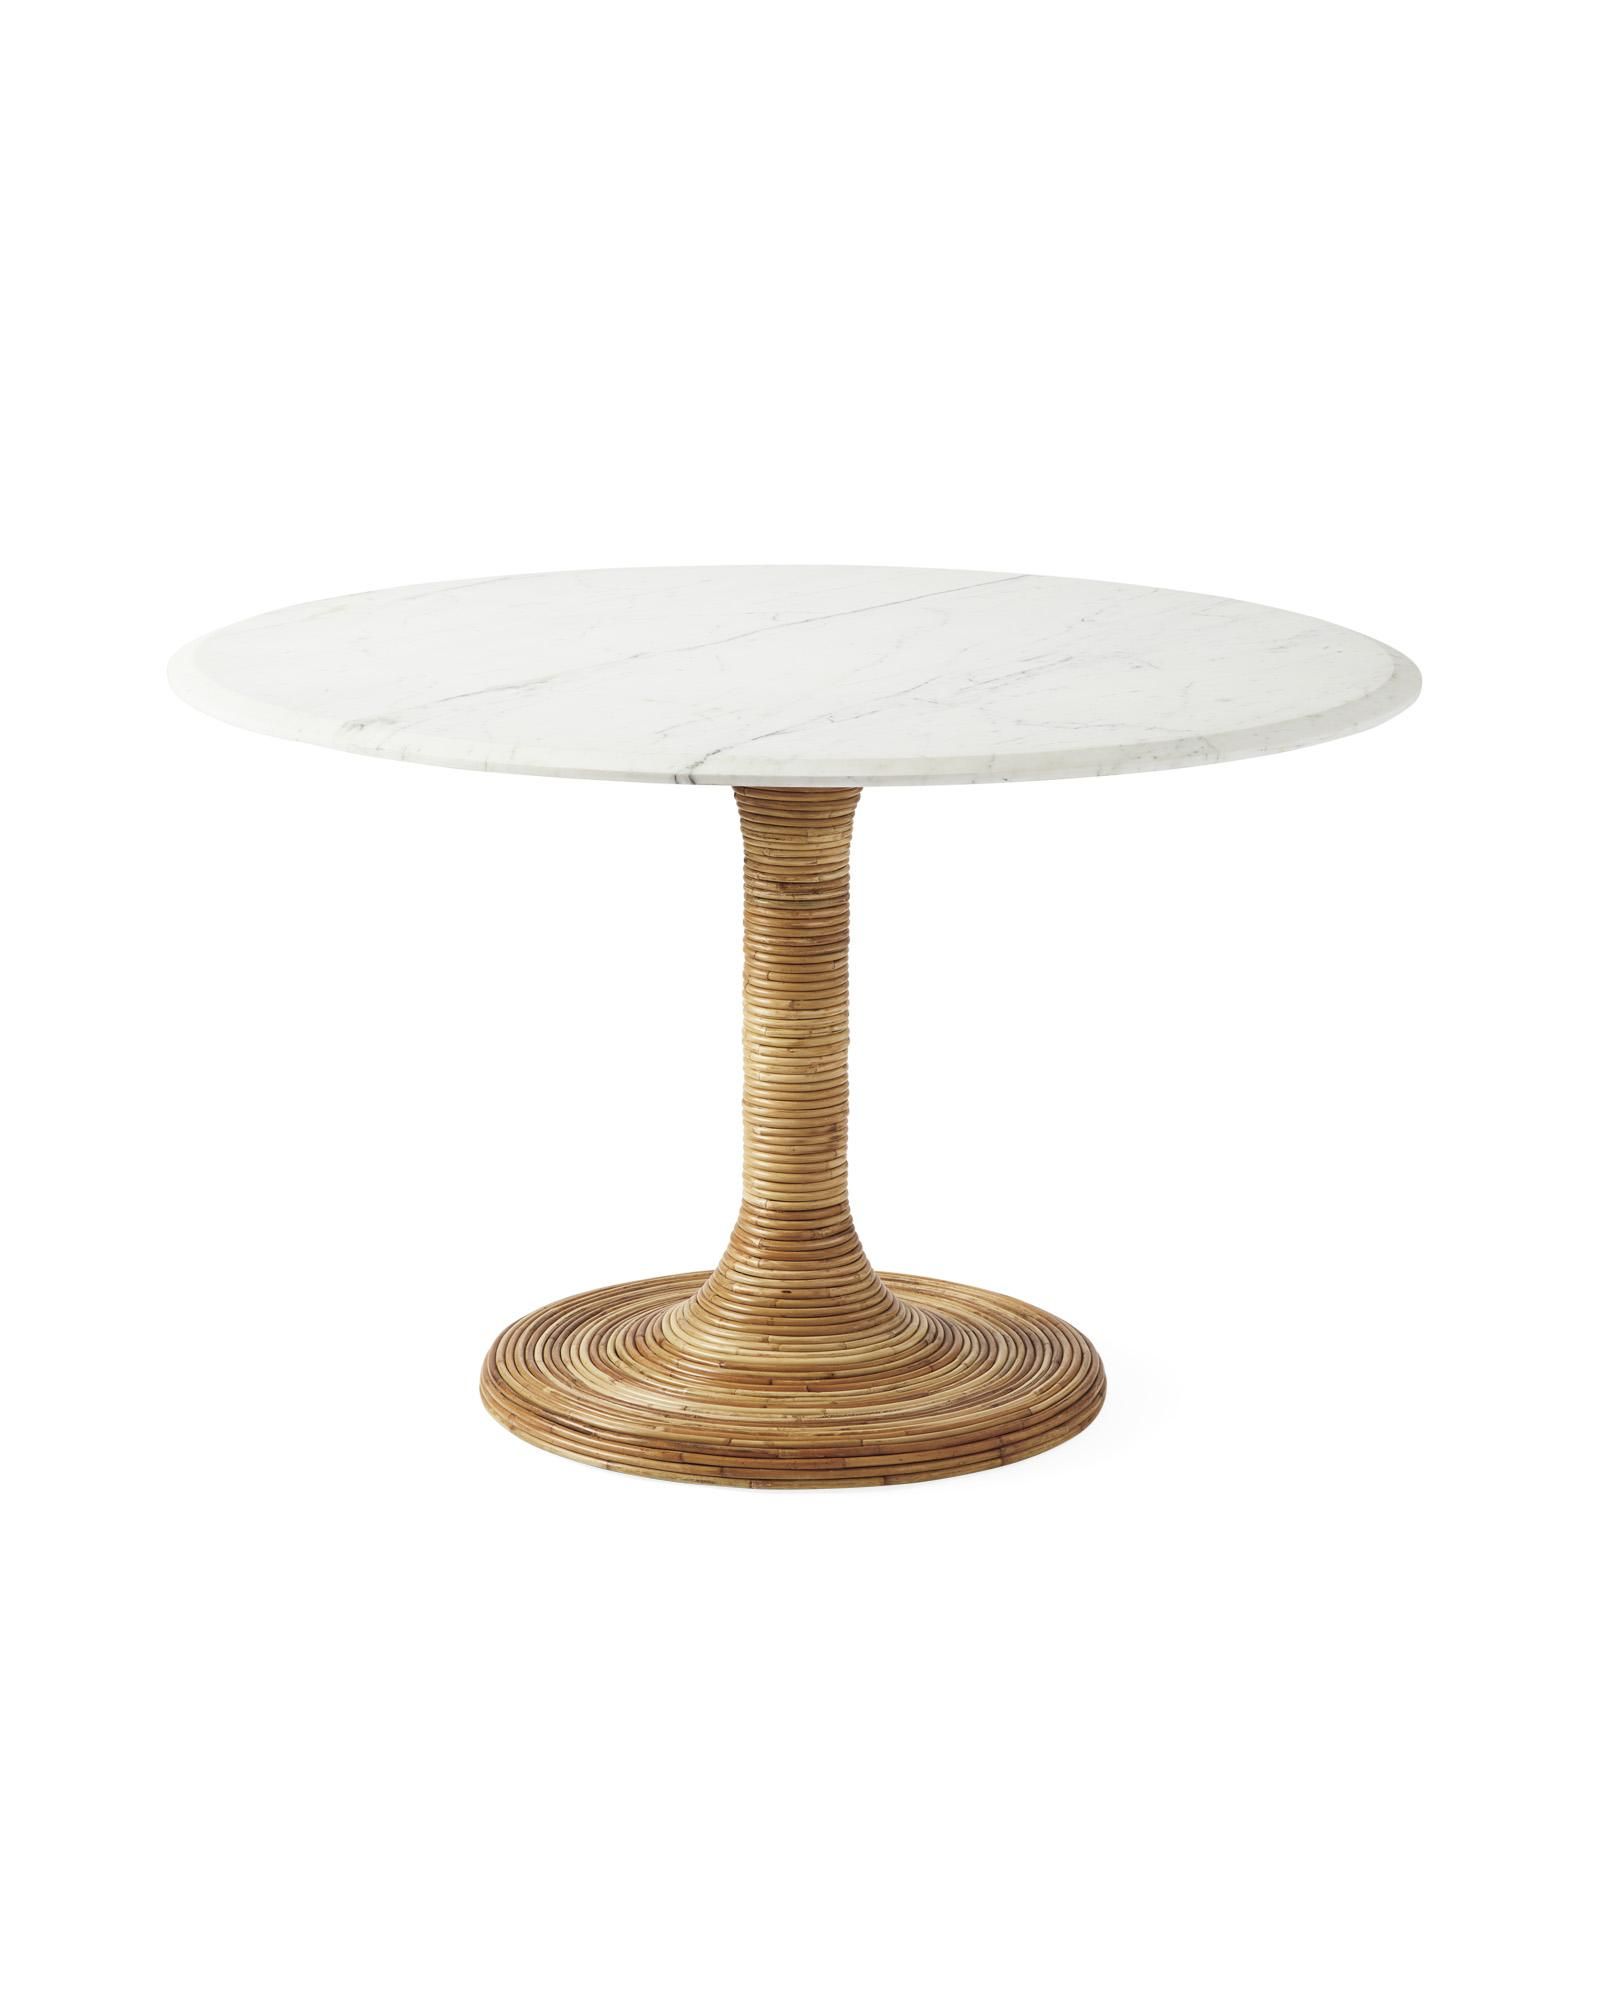 Southampton Dining Table | Serena and Lily